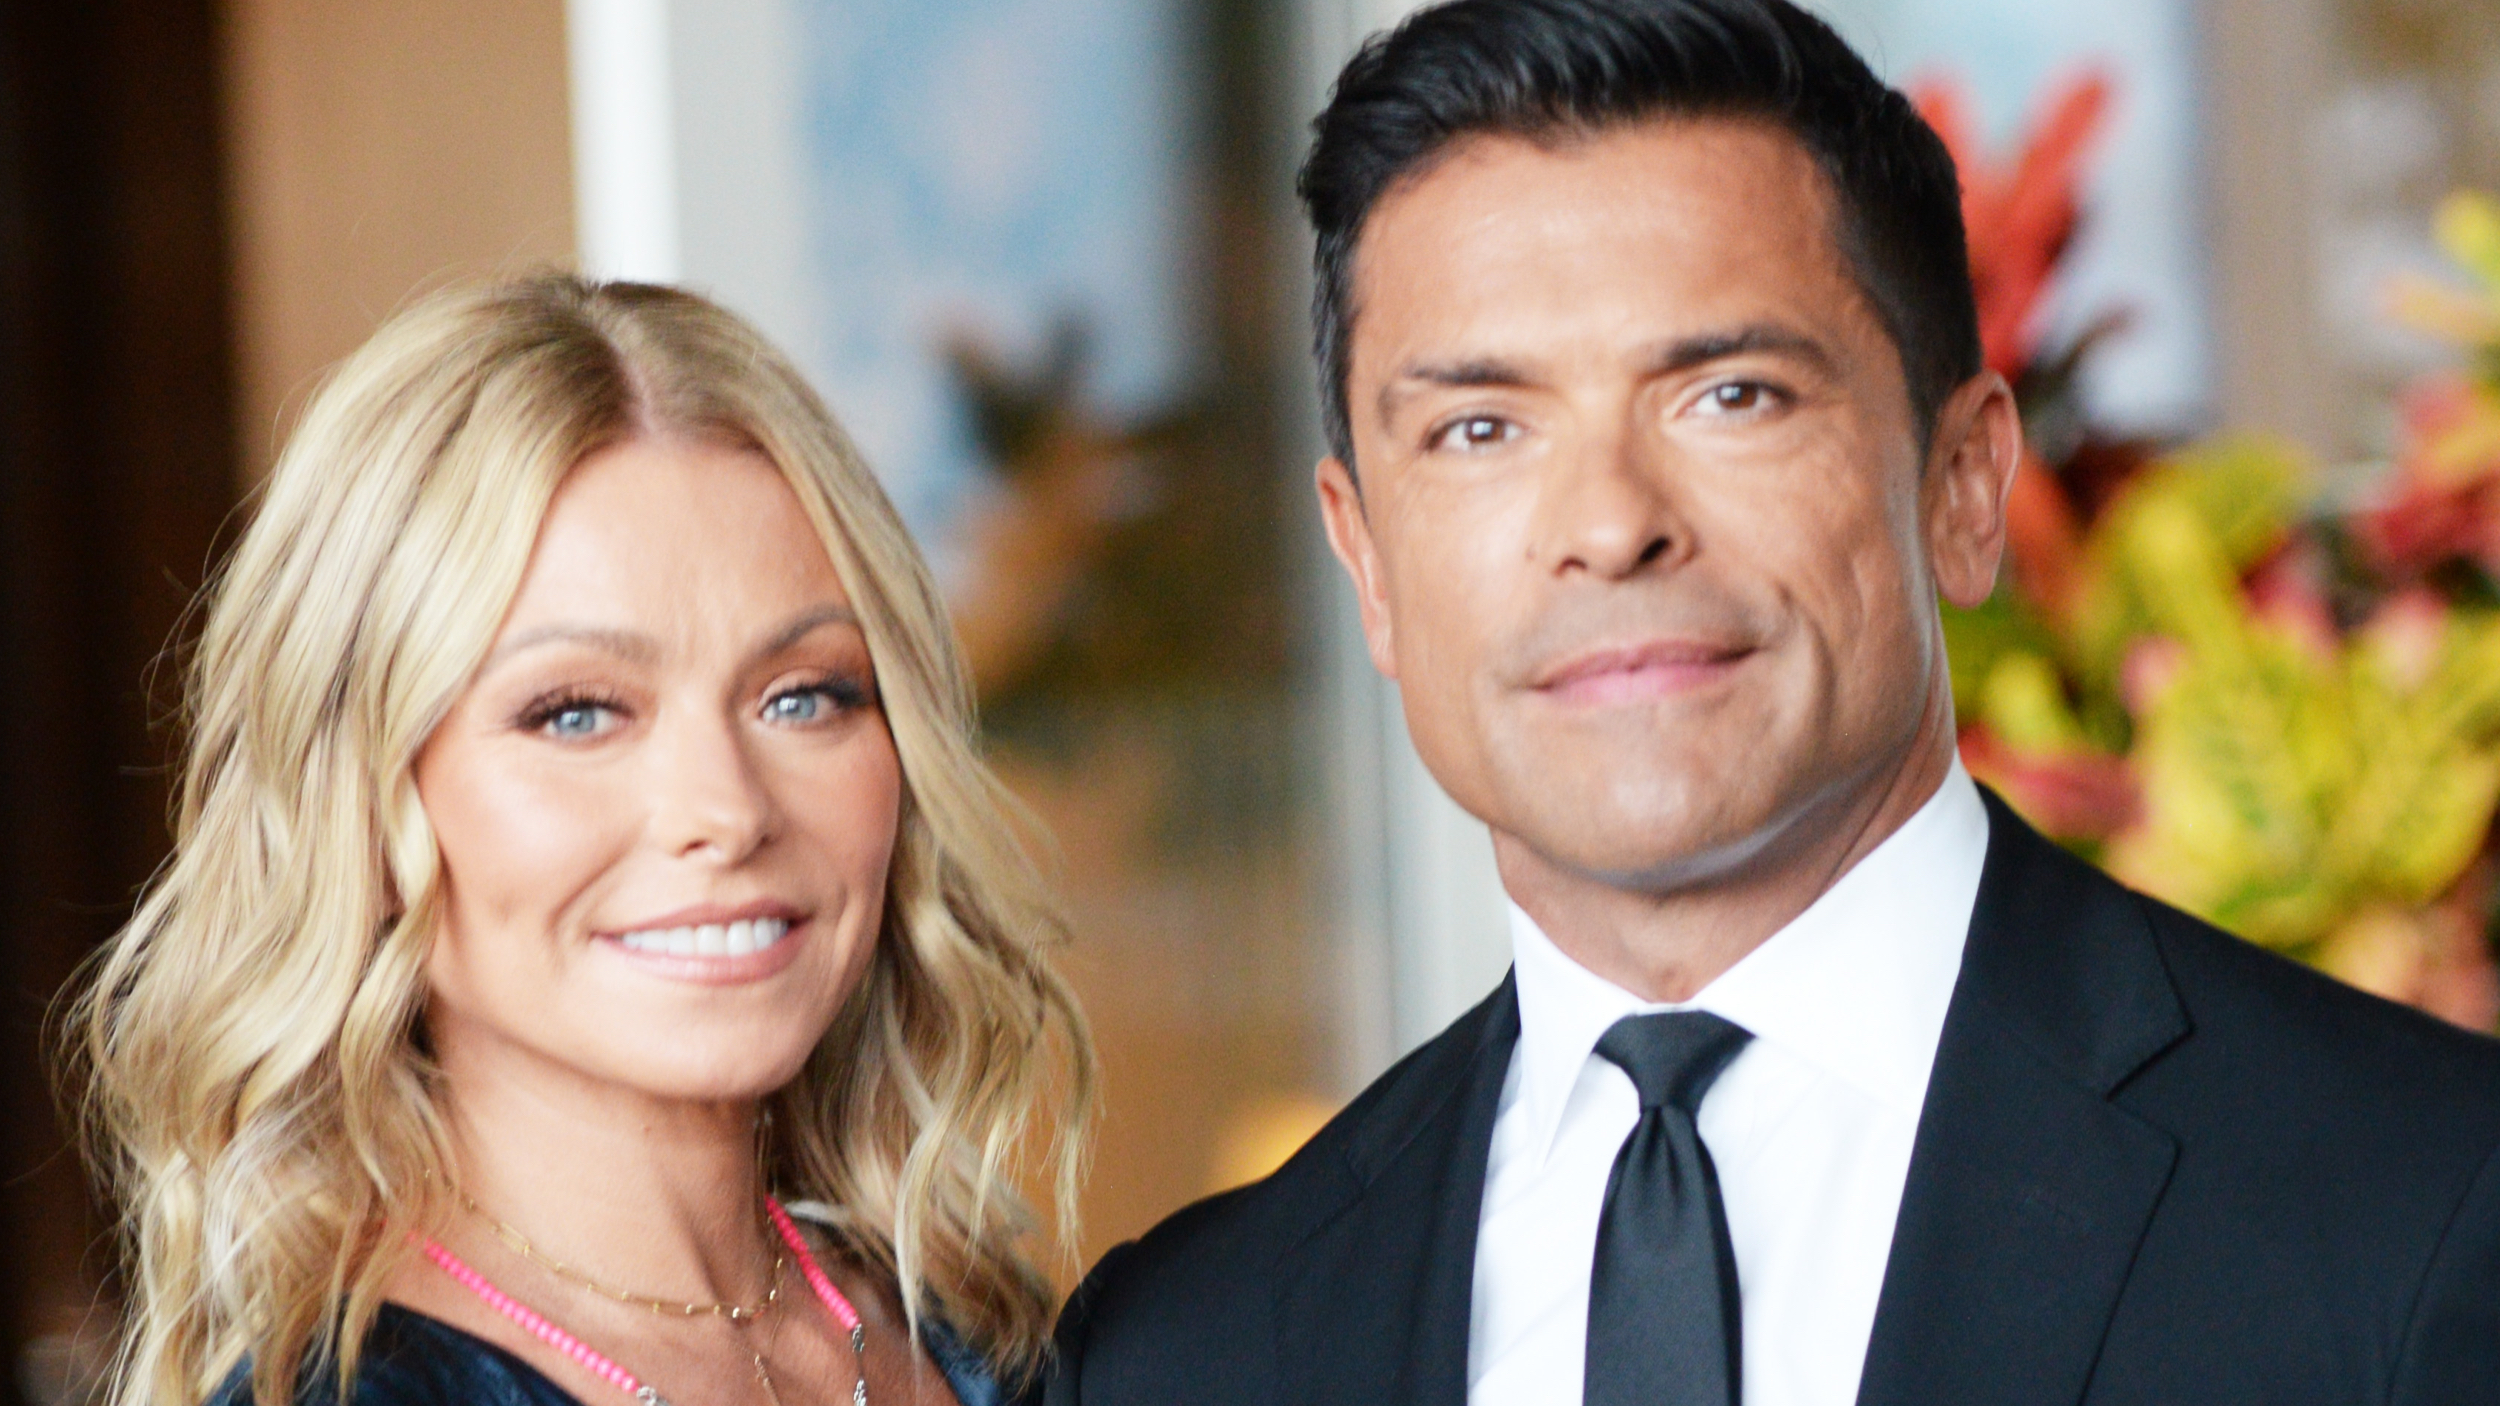 Kelly Ripa Says She Was Once Told She ‘Couldn’t Have An Office,’ Reveals Shocking Place Where She Finally Got To Have A Desk